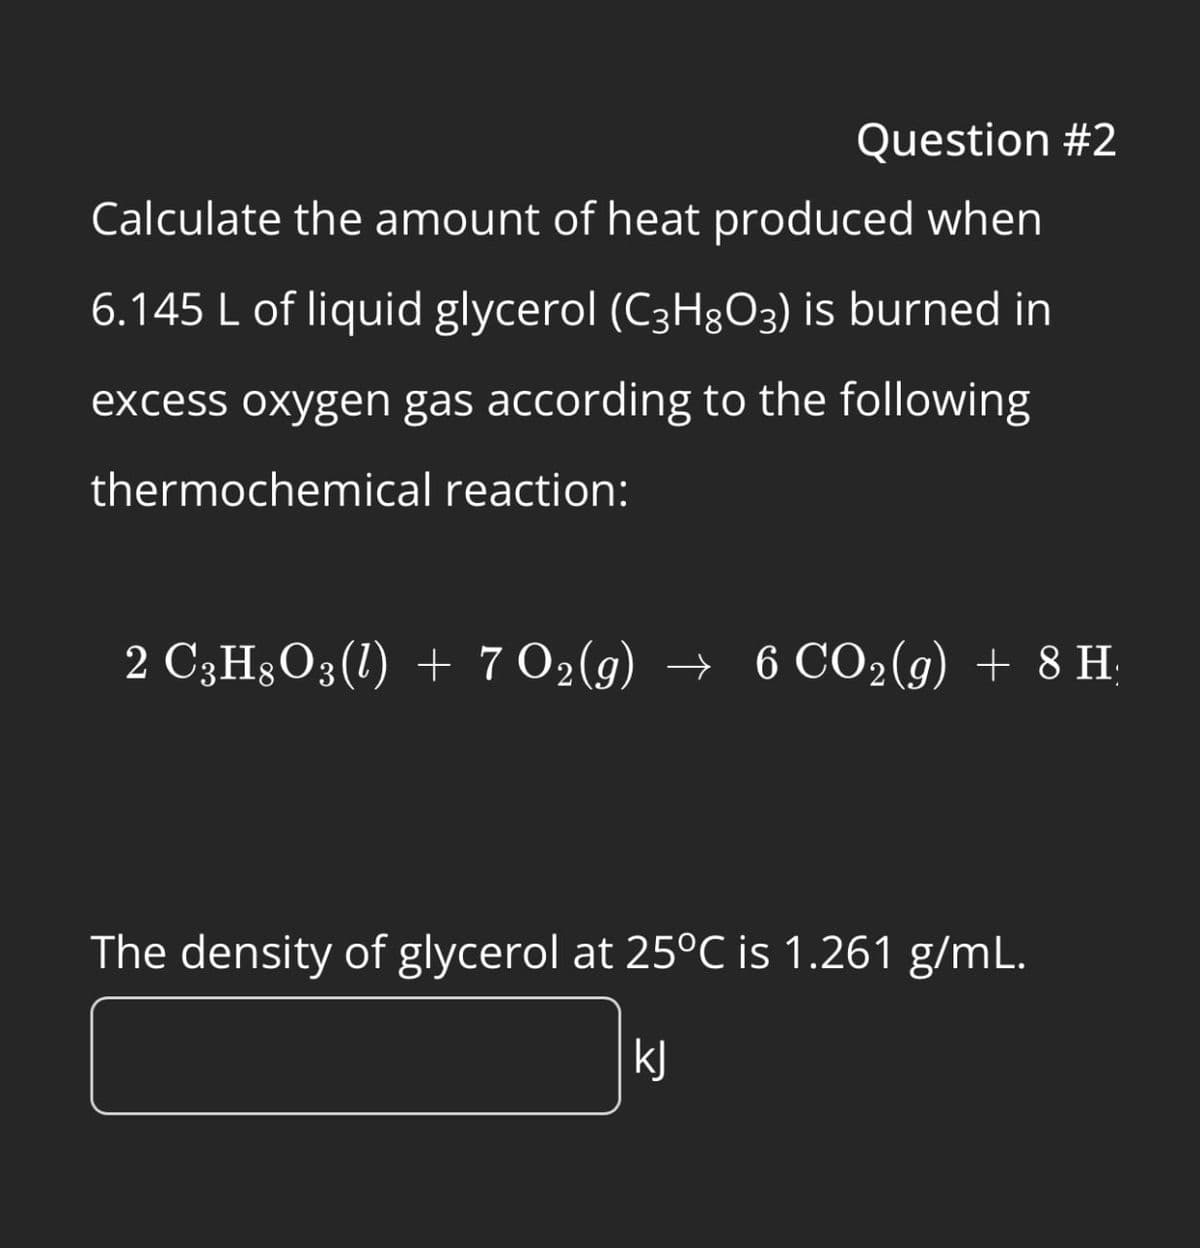 Question #2
Calculate the amount of heat produced when
6.145 L of liquid glycerol (C3H8O3) is burned in
excess oxygen gas according to the following
thermochemical reaction:
2 CHÃO(l) + 702(g) → 6 CO2(g) + 8 H:
The density of glycerol at 25°C is 1.261 g/mL.
kj